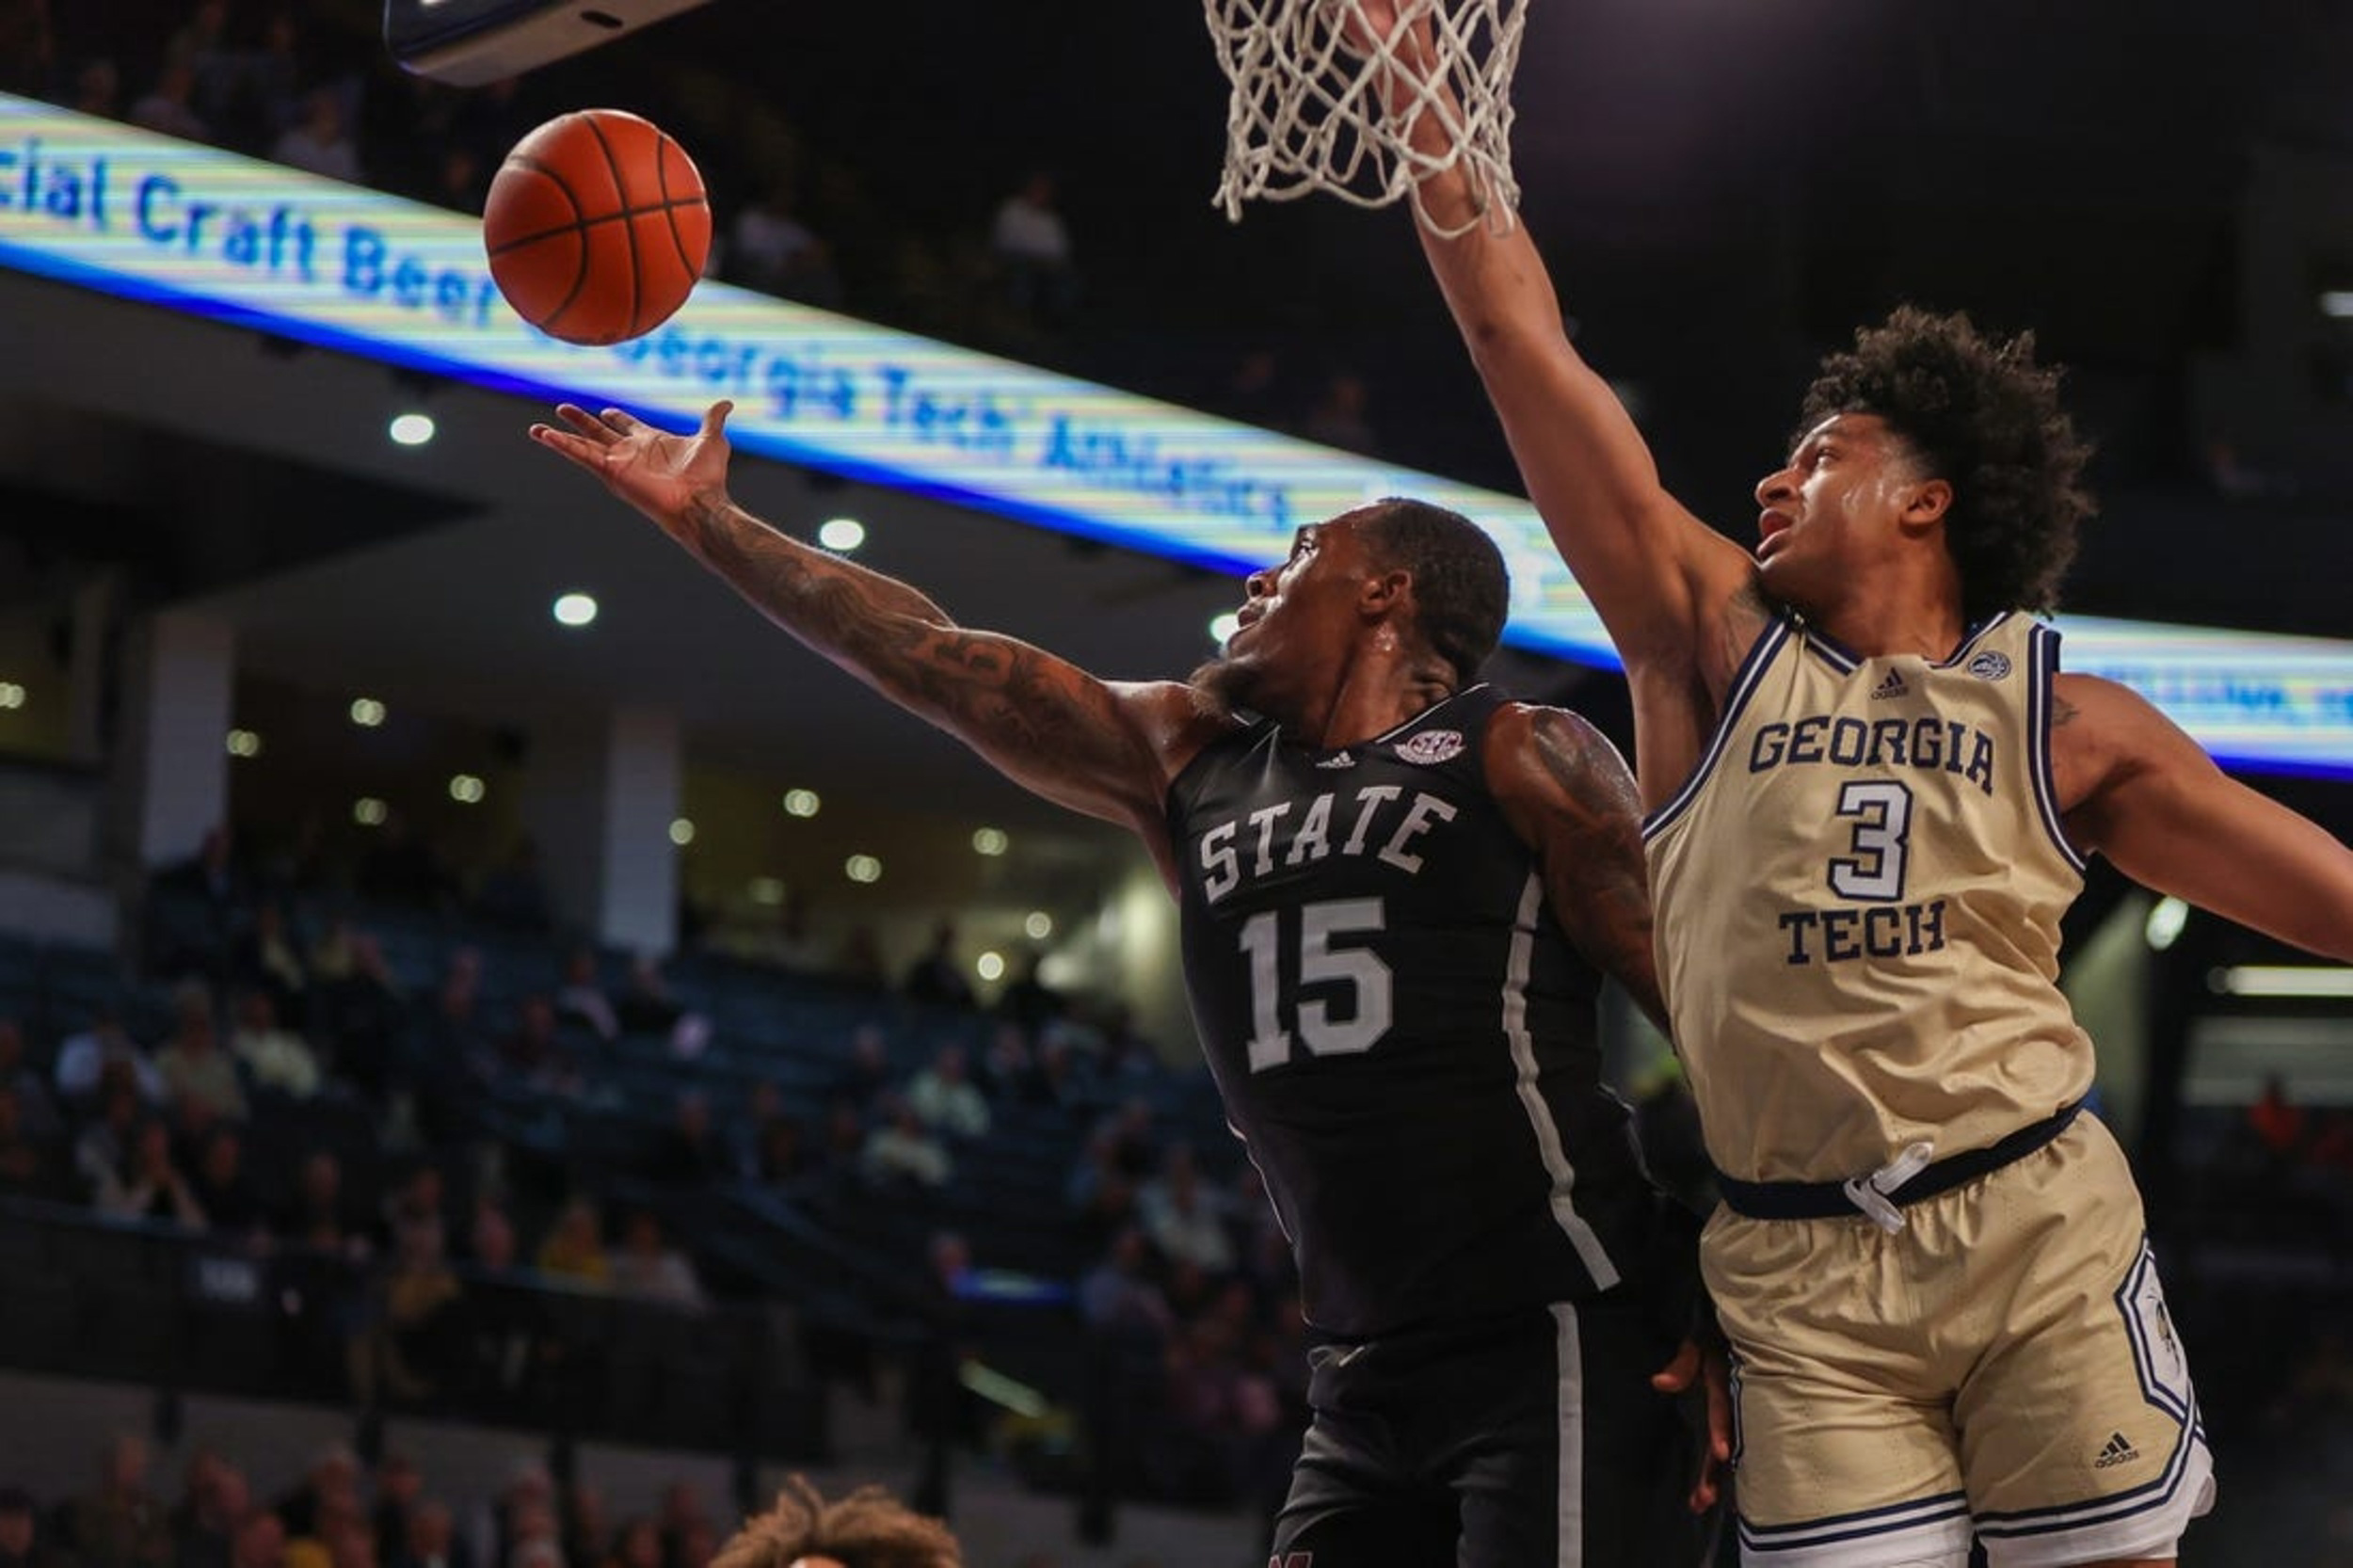 Georgia Tech never trails in win over No. 21 Mississippi St.